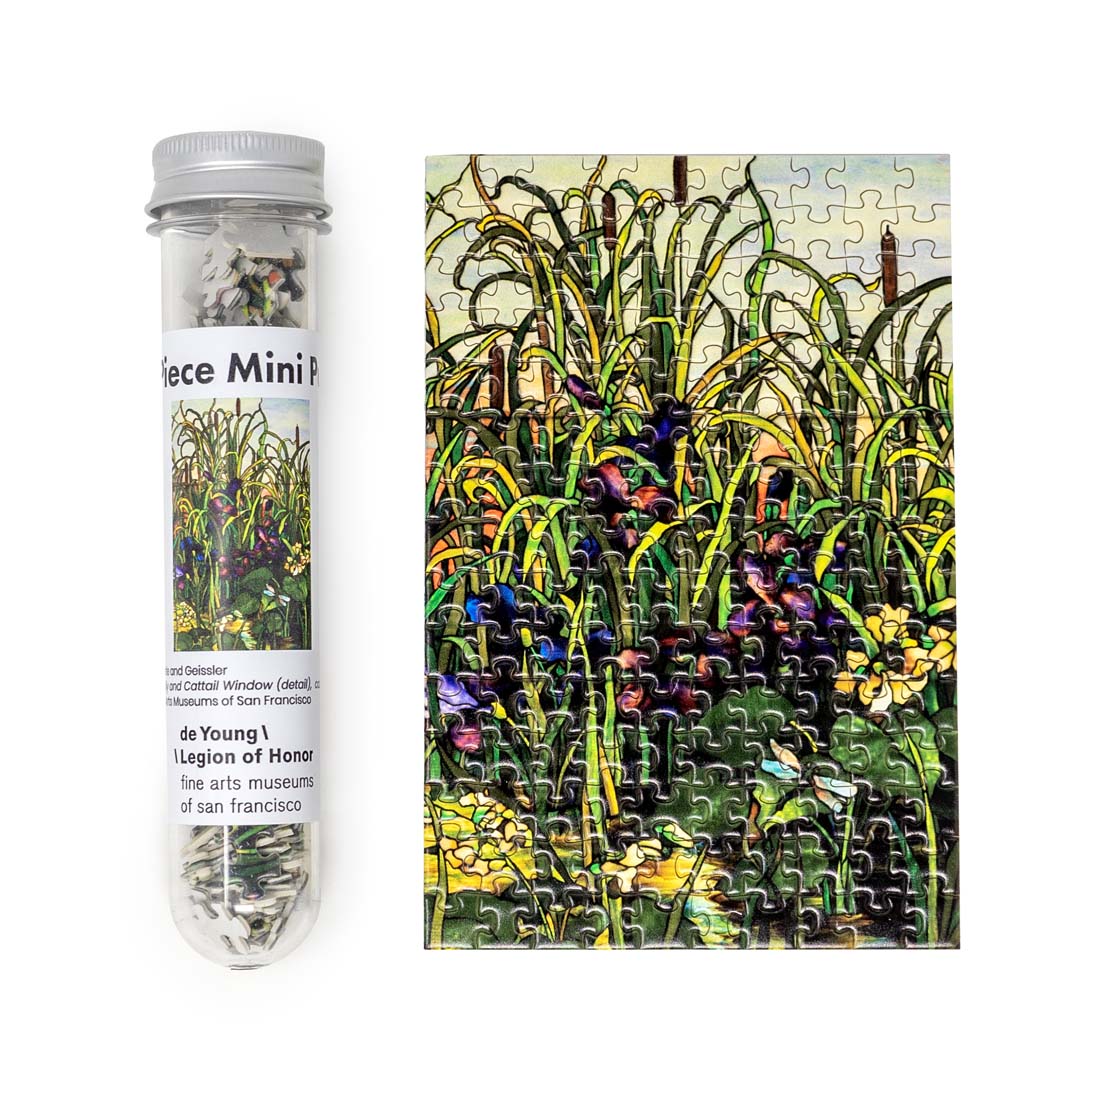 Lederle &amp; Geissler Iris, Lily and Cattail Window Mini Puzzle